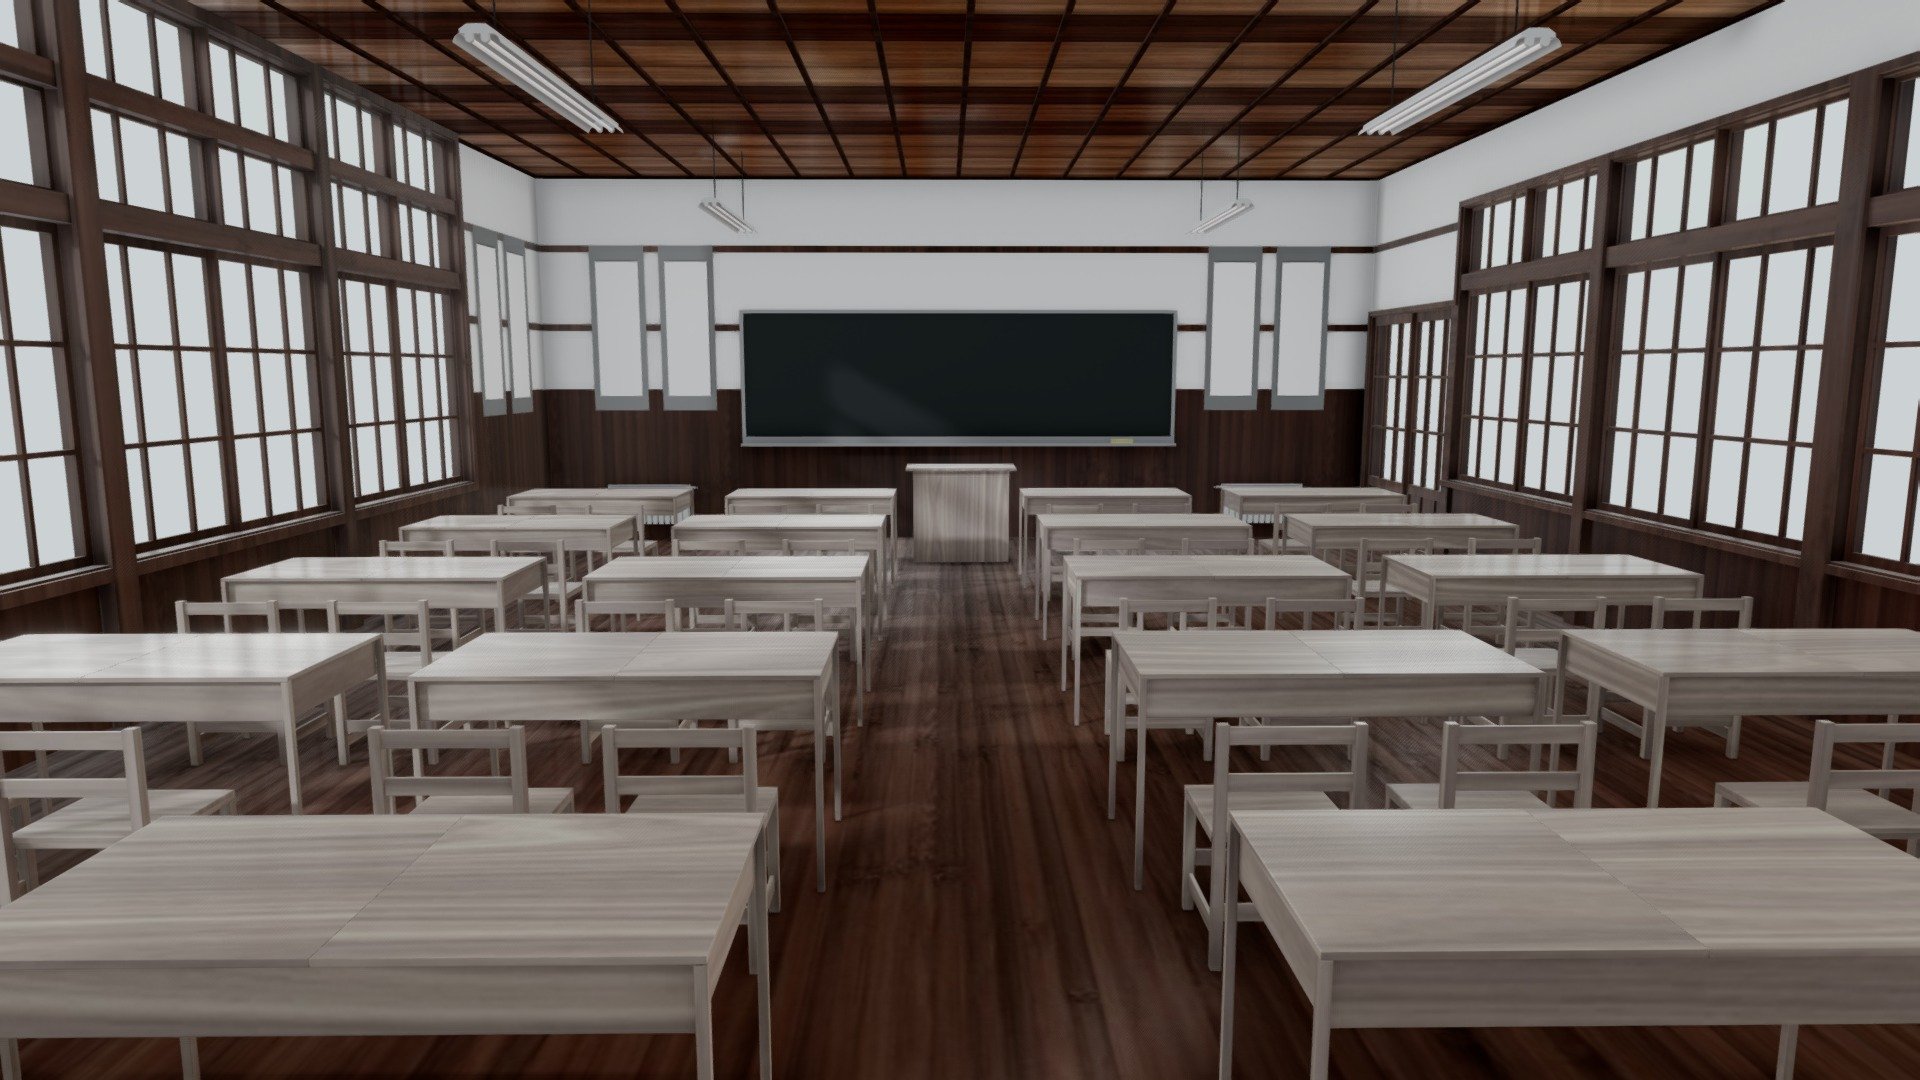 Ambient Occlusion and Lighting with Blender.
Virtual Reality Classroom prepared for VR.
Format FBX file size : 2.91MB.
Ready to use.

Click on the link to see more models : https://sketchfab.com/GbehnamG/store

If you need customized 3d models , feel free to contact at: mr.gbehnamg@yahoo.com - VR ClassRoom Sep. 2021 - Buy Royalty Free 3D model by BehNaM (@GbehnamG) 3d model